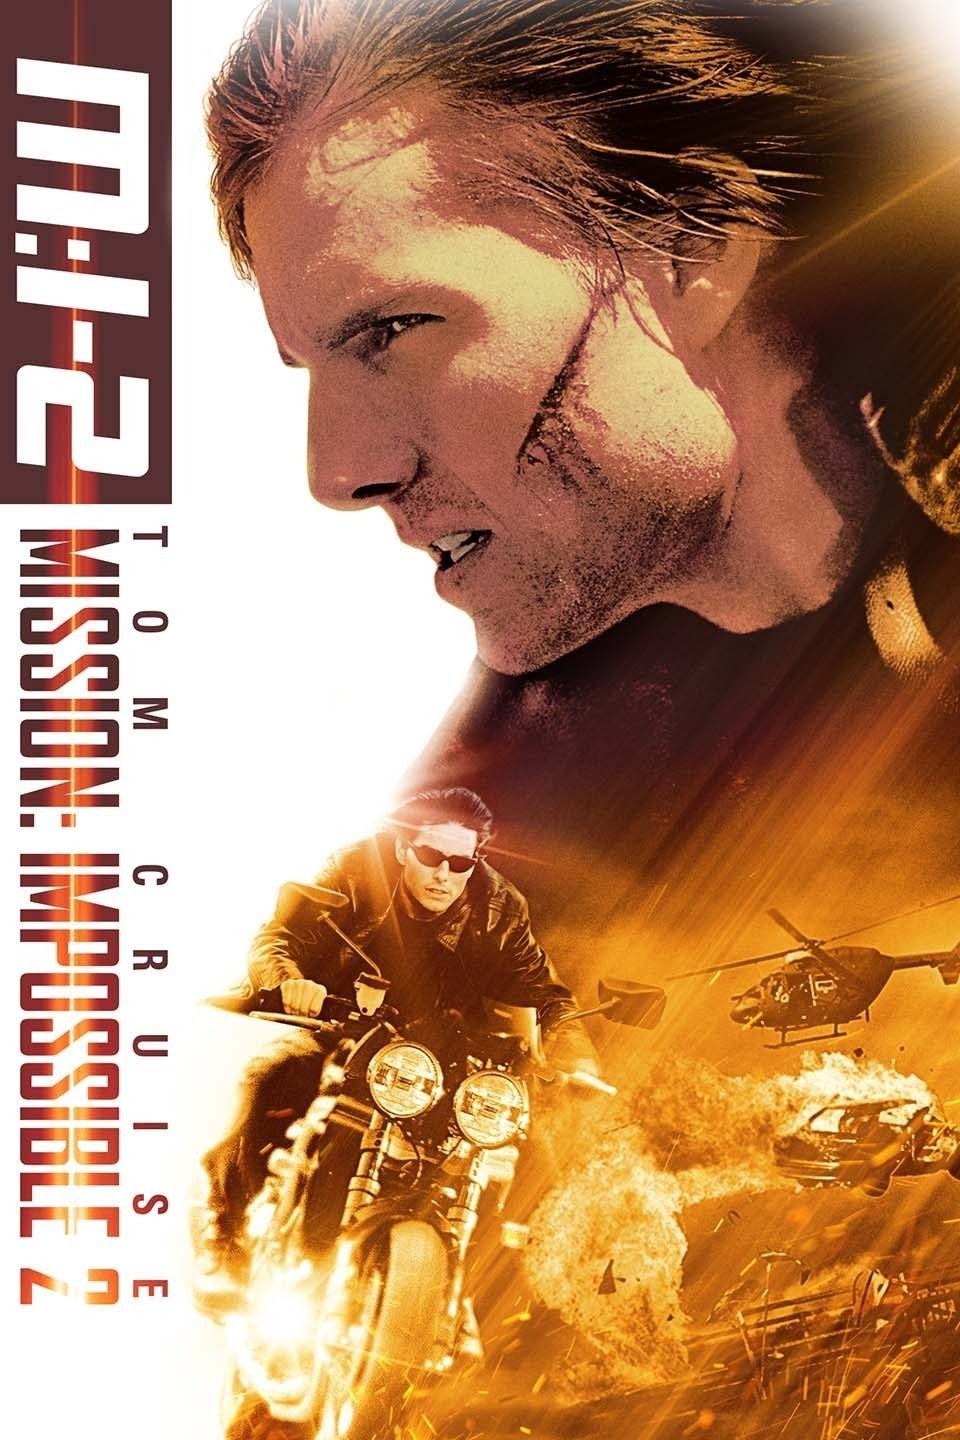 mission impossible 4 full 9xmovie in hindi 720p download